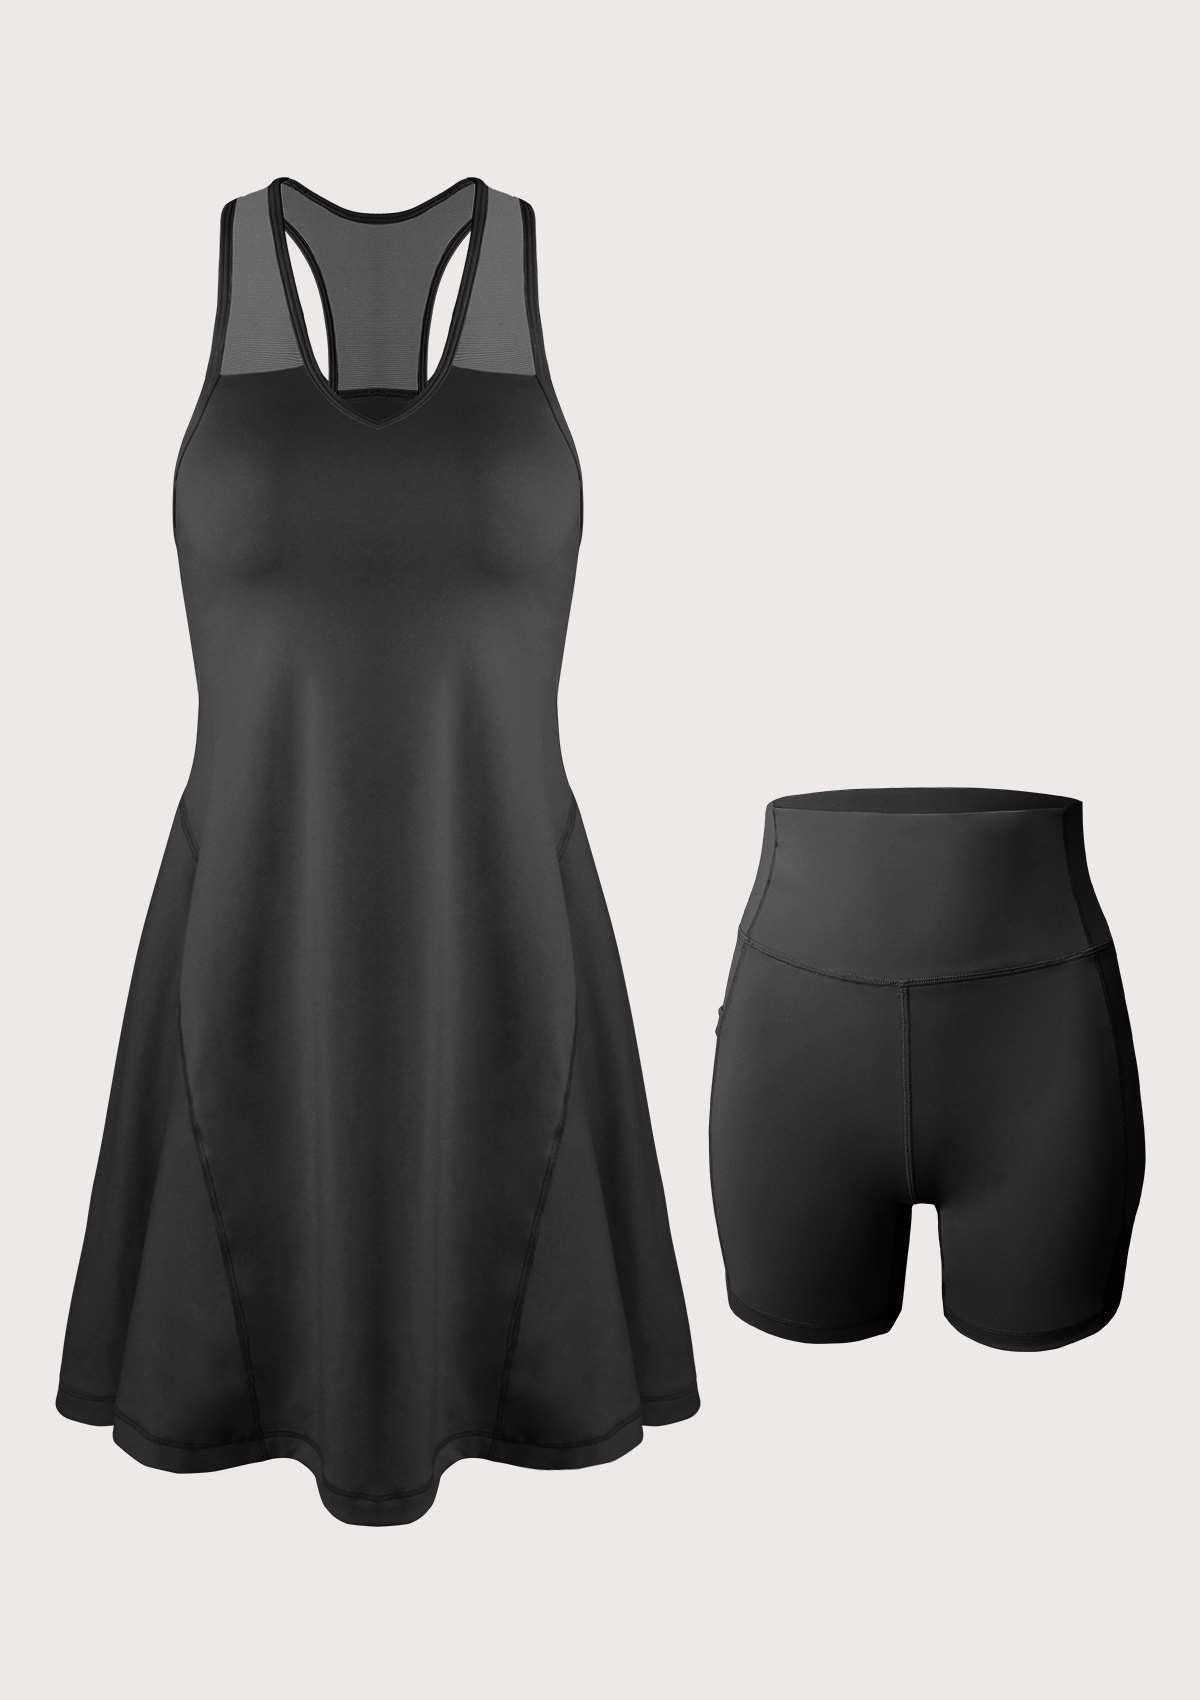 SONGFUL On The Move Sports Dress With Shorts Set - M / Black